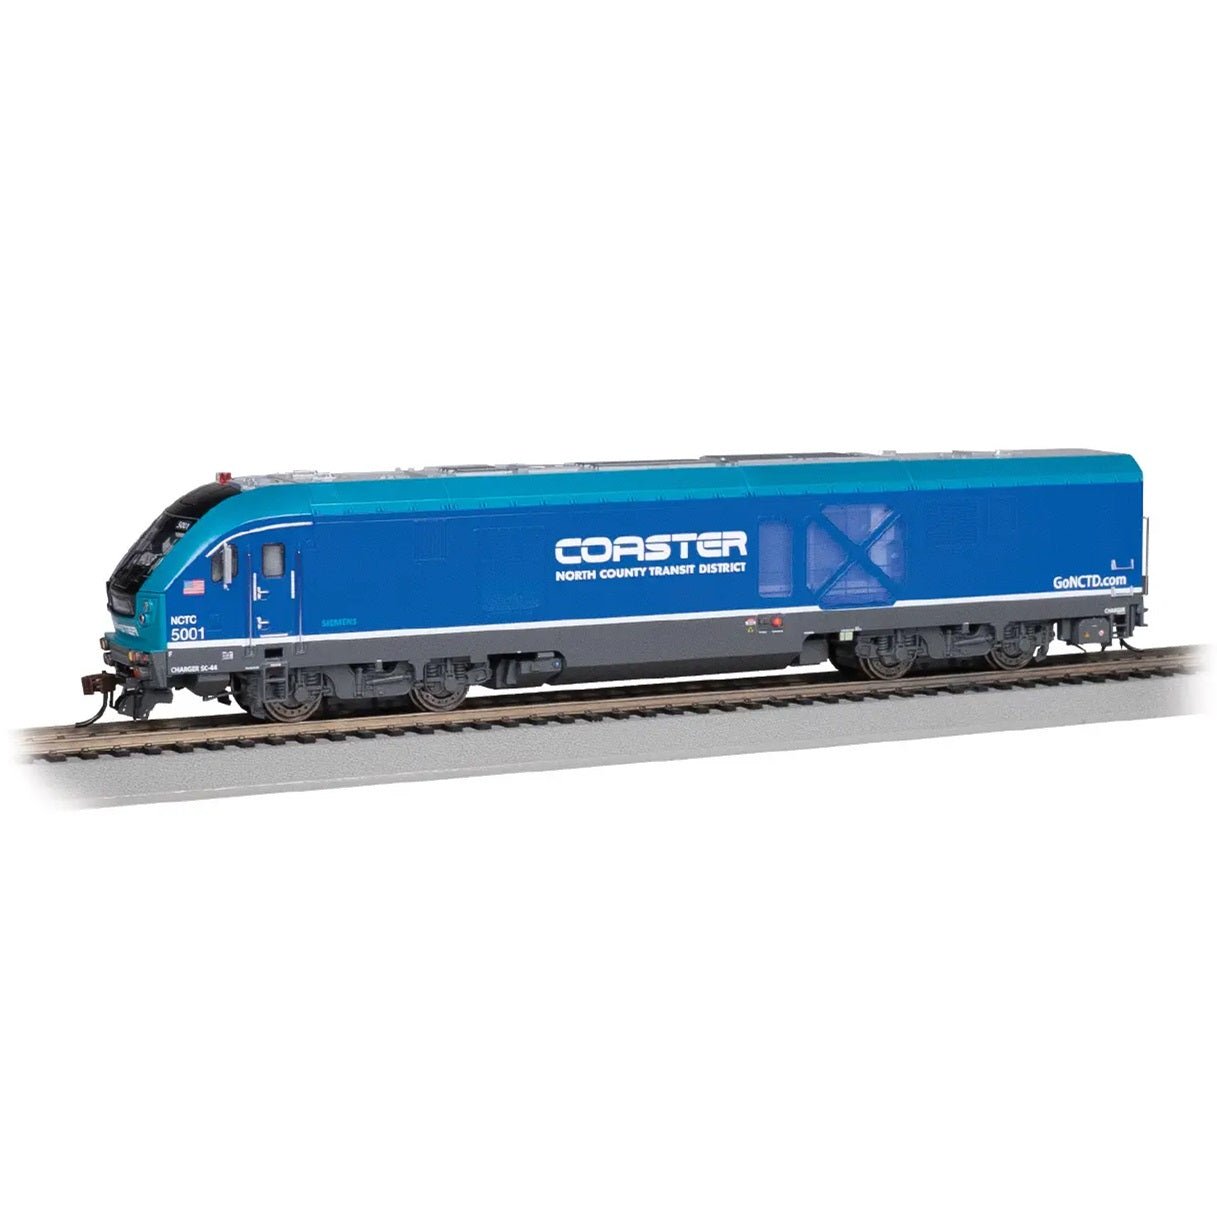 Bachmann SC - 44 Charger Diesel Electric Locomotive - North County Transit District (San Diego County) "Coaster" #5001, HO Scale